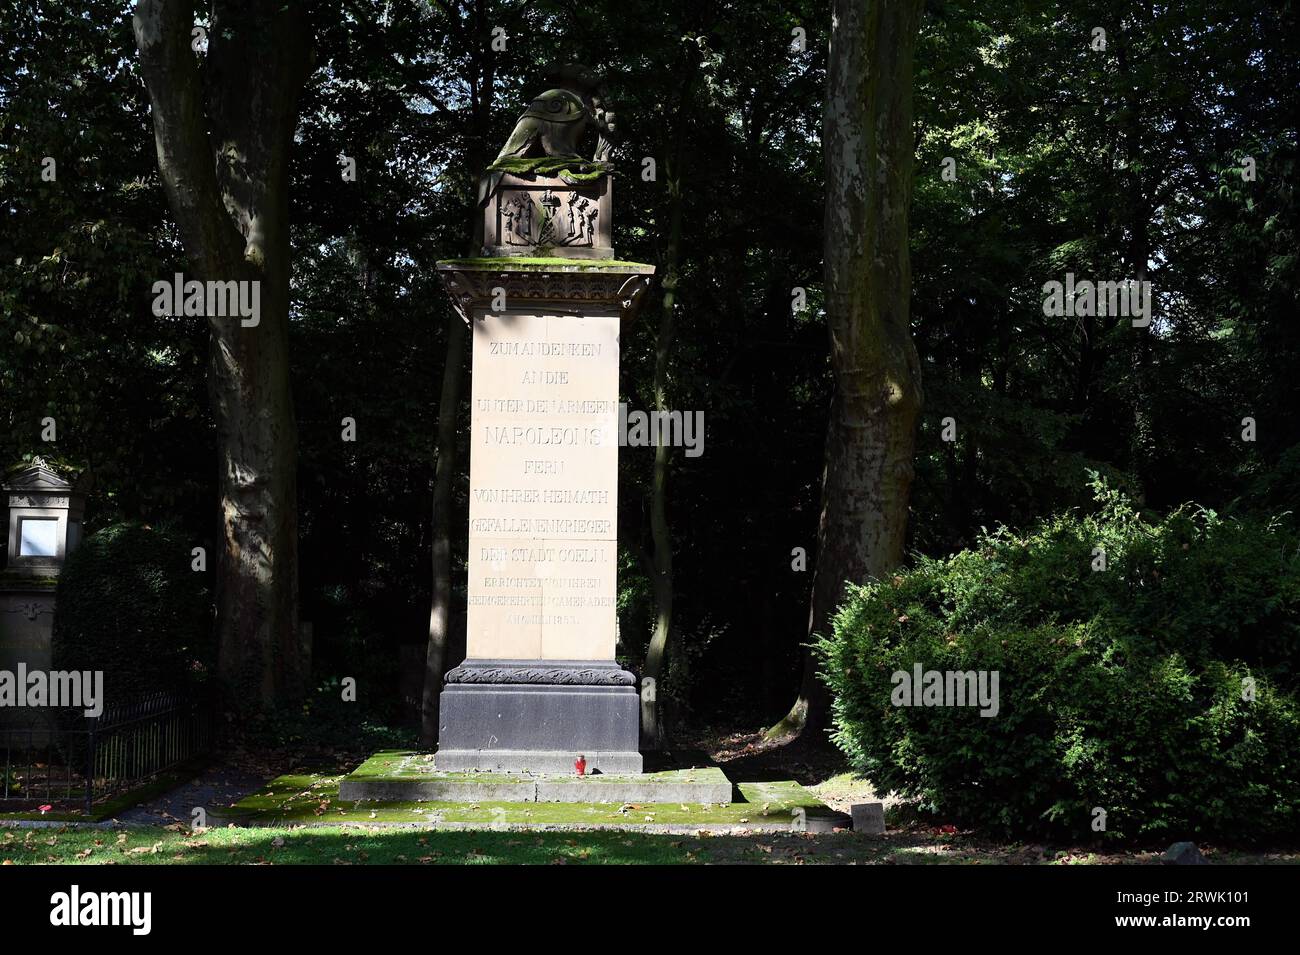 Cologne, Germany. 10th Sep, 2023. The Napoleon Stone in Cologne's Melaten Cemetery is a war memorial to soldiers from Cologne who fought under Napoleon Bonaparte and died during the Napoleonic Wars. Grave at the Cologne Cemetery of Celebrities Melaten Credit: Horst Galuschka/dpa/Horst Galuschka dpa/Alamy Live News Stock Photo